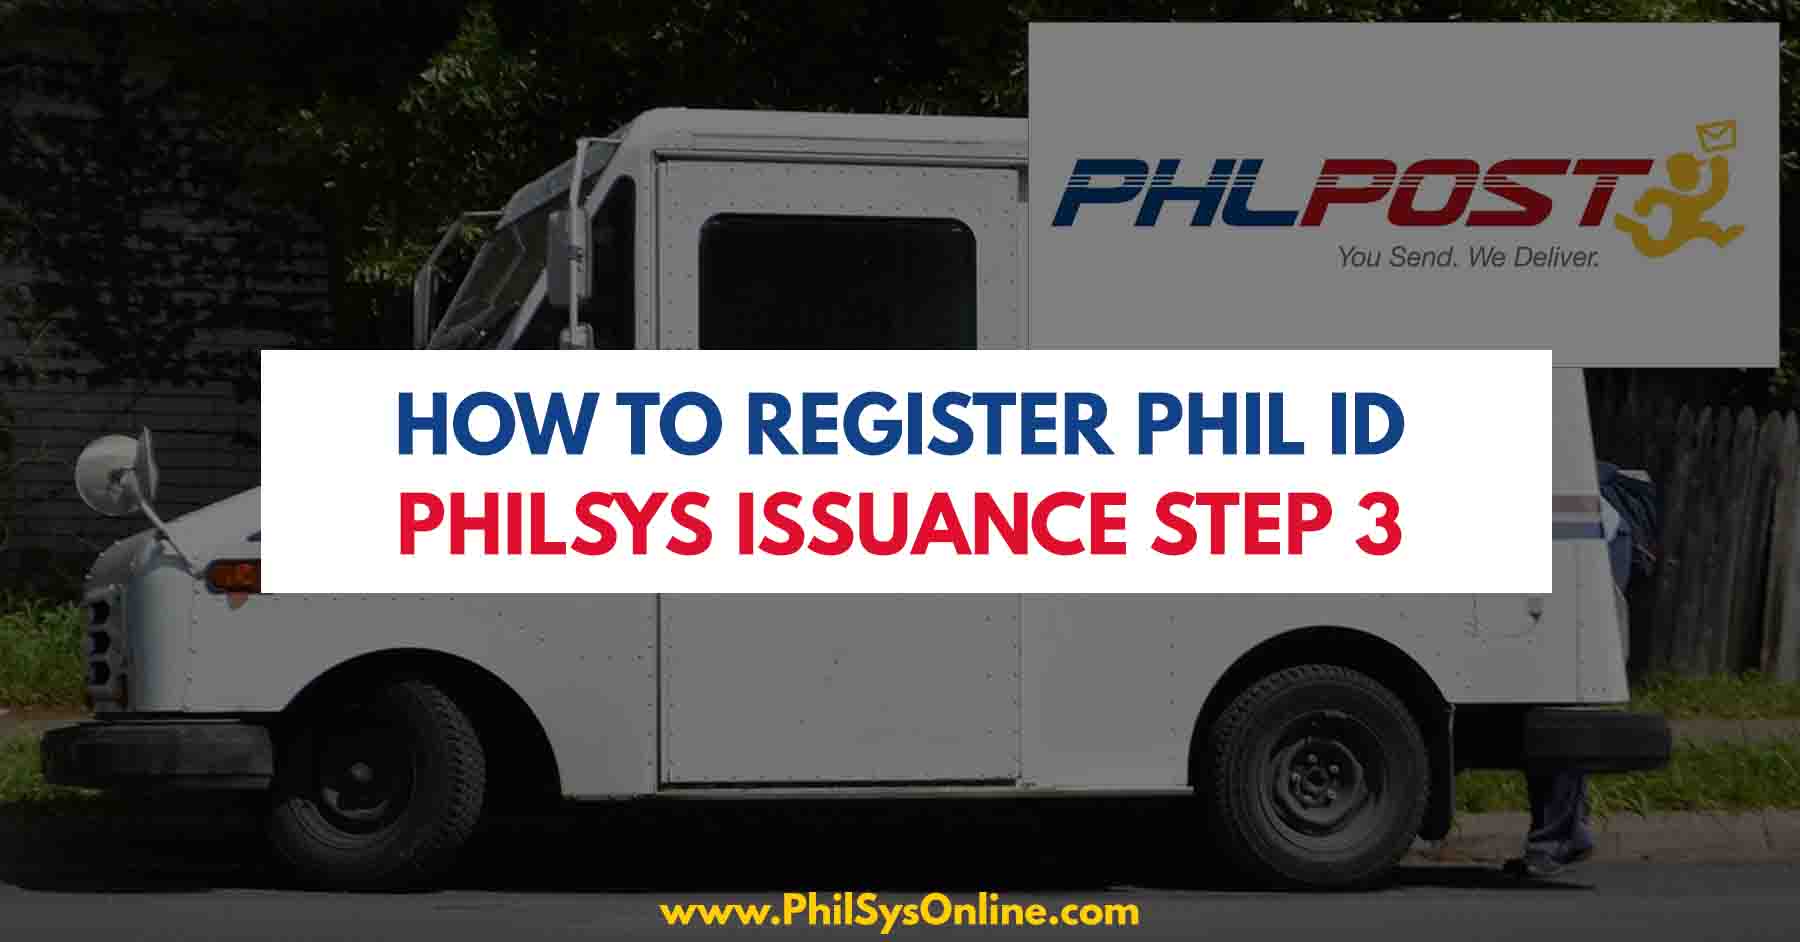 philsys step 3 issuance of philippine national id